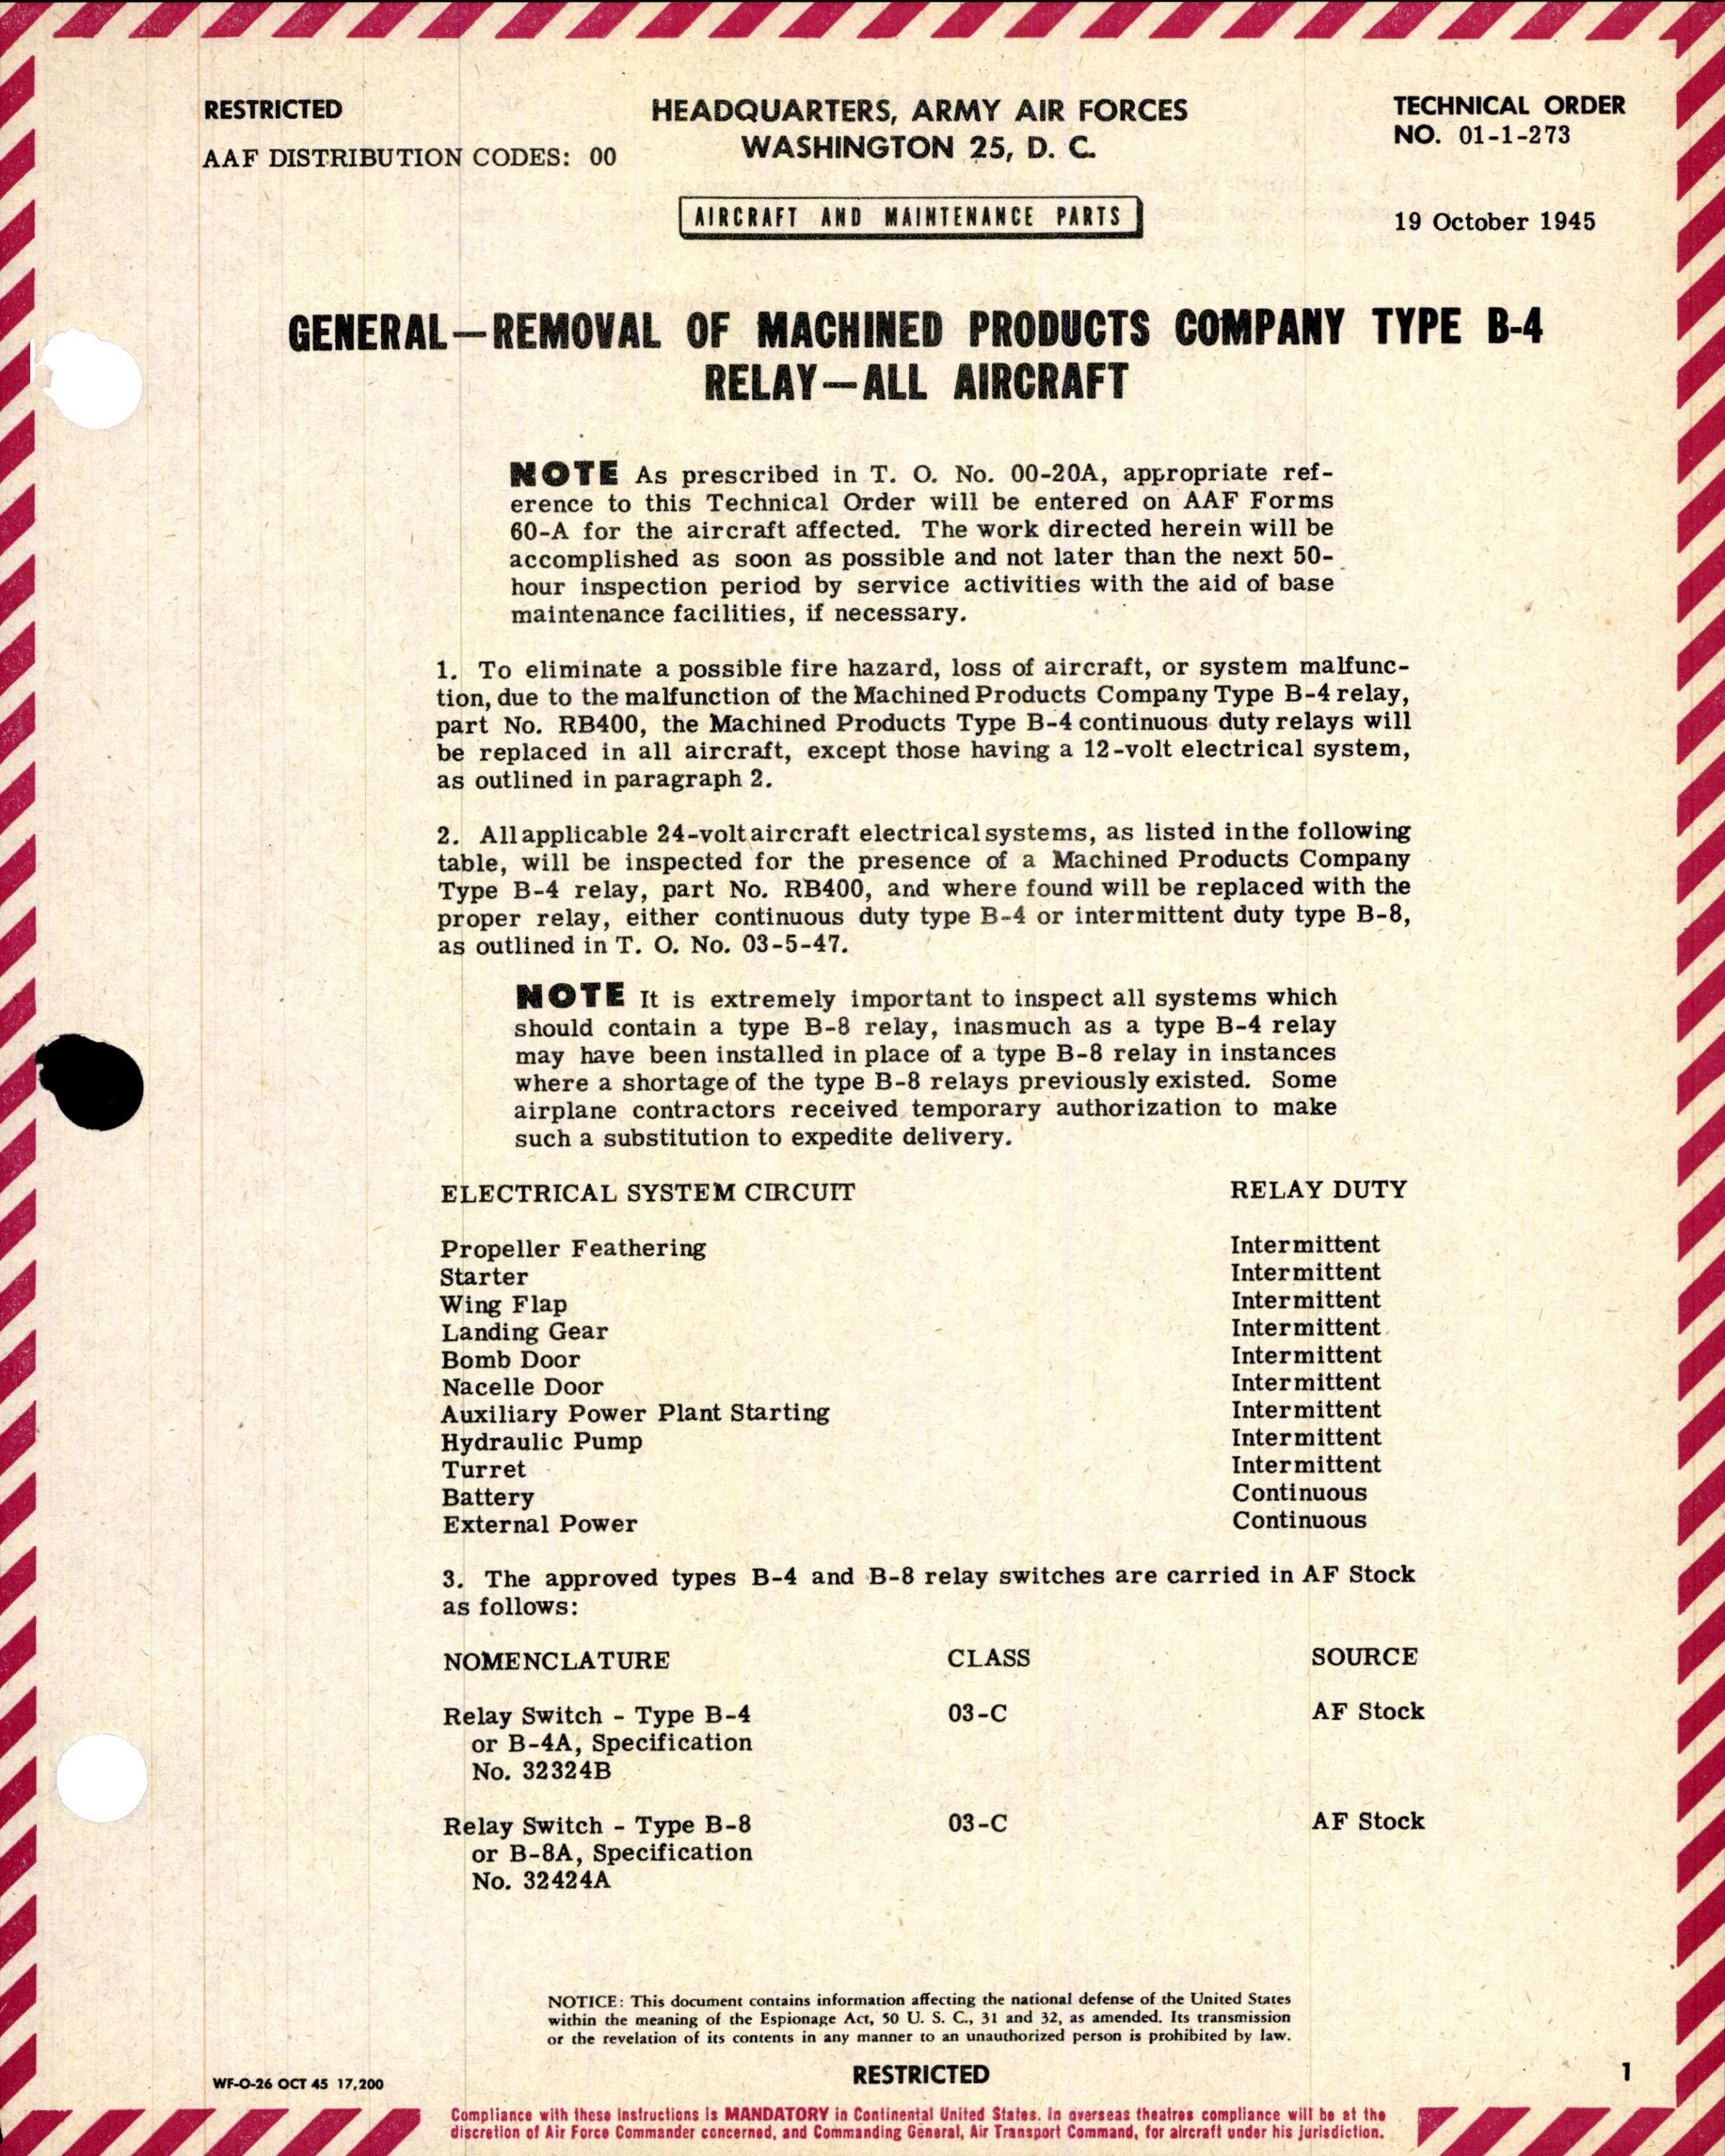 Sample page 1 from AirCorps Library document: Removal of Machined Products Company Type B-4 Relay